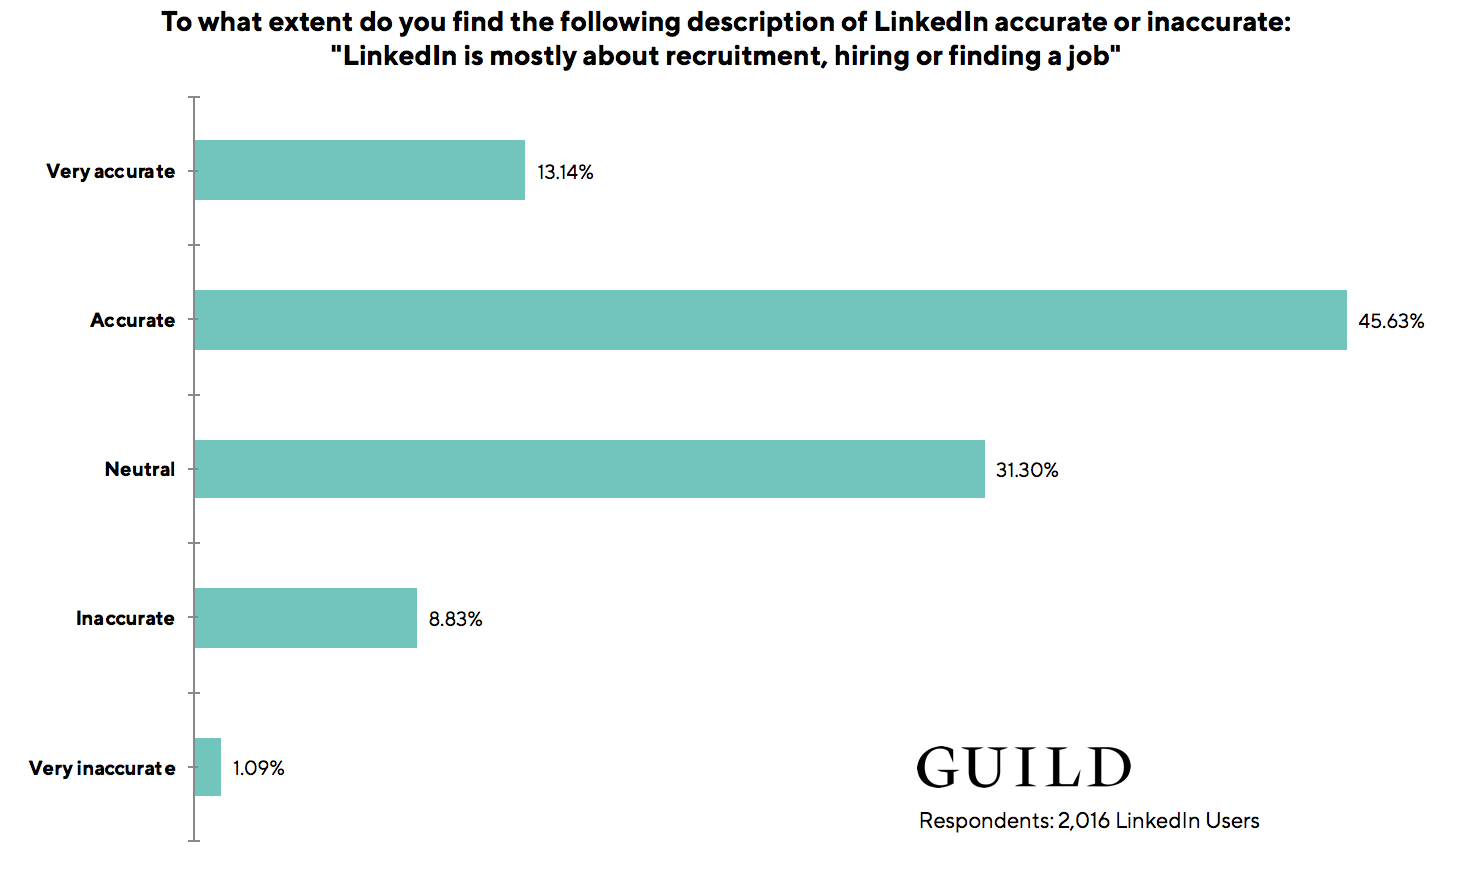 LinkedIn statistics: 59% of LinkedIn users feel that LinkedIn is mostly about recruitment, hiring or finding a job